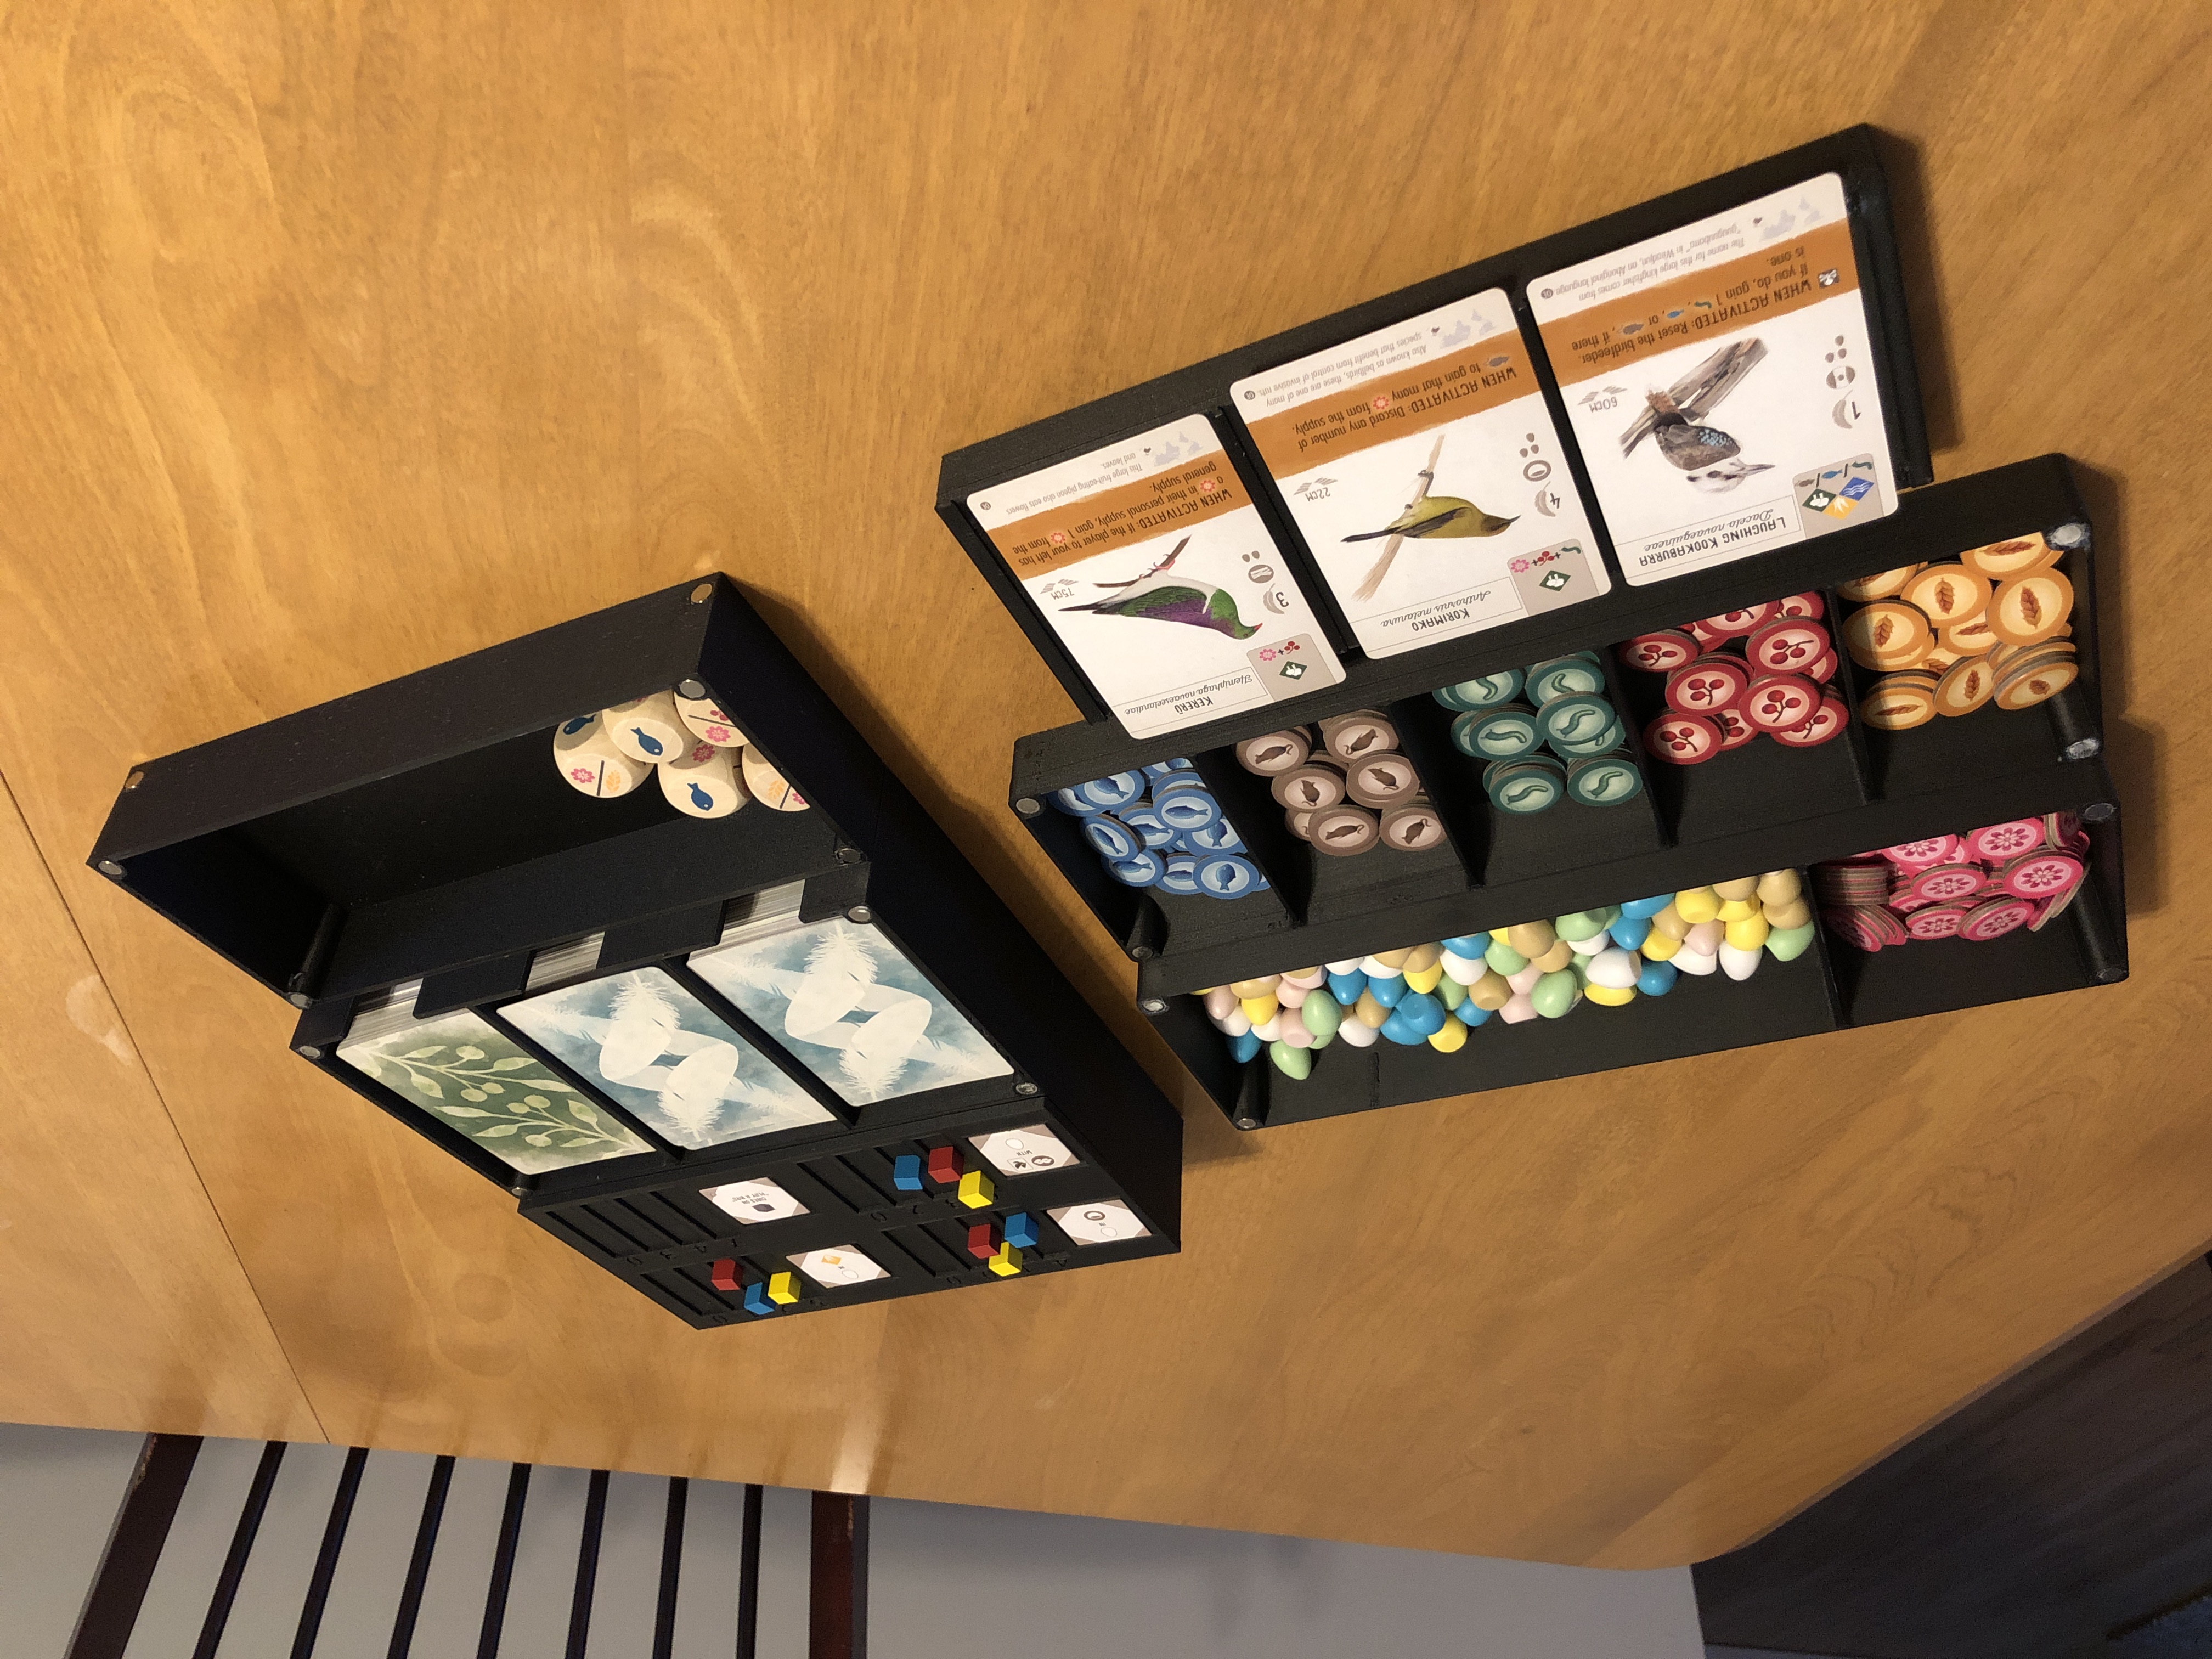 Dominant Species Insert / Board Game Box Organizer With -  Hong Kong